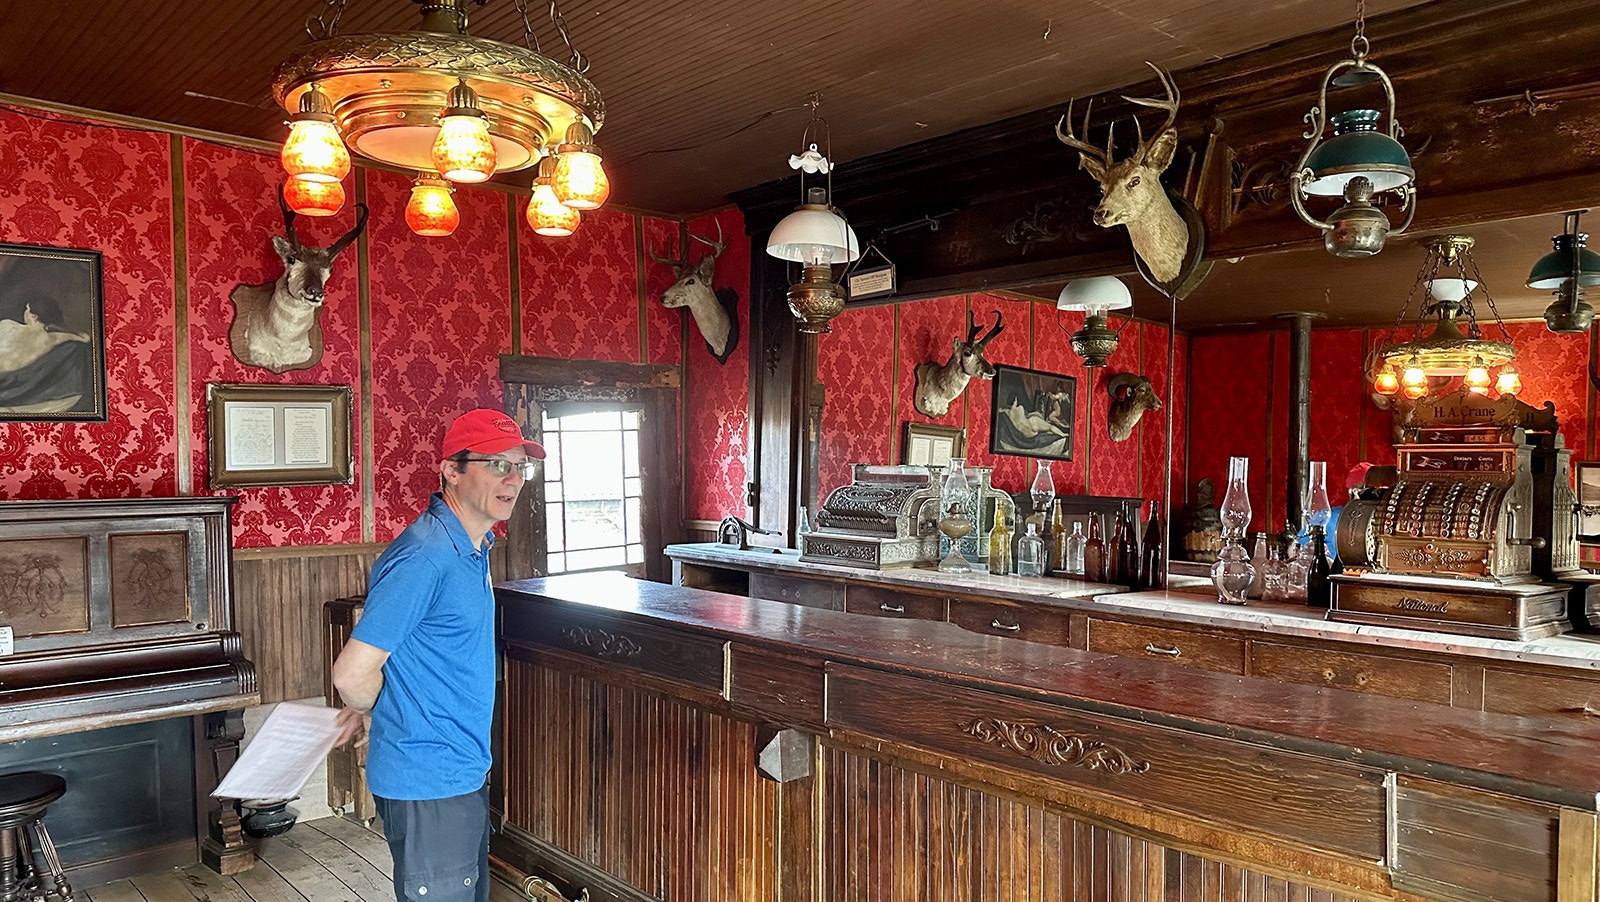 The Rivers Saloon at Old Trail Town, originally located west of Meeteetse at the mouth of the Wood River. The saloon was a favorite spot for Butch Cassidy and is the oldest saloon from the Wyoming Territory in northwest Wyoming.